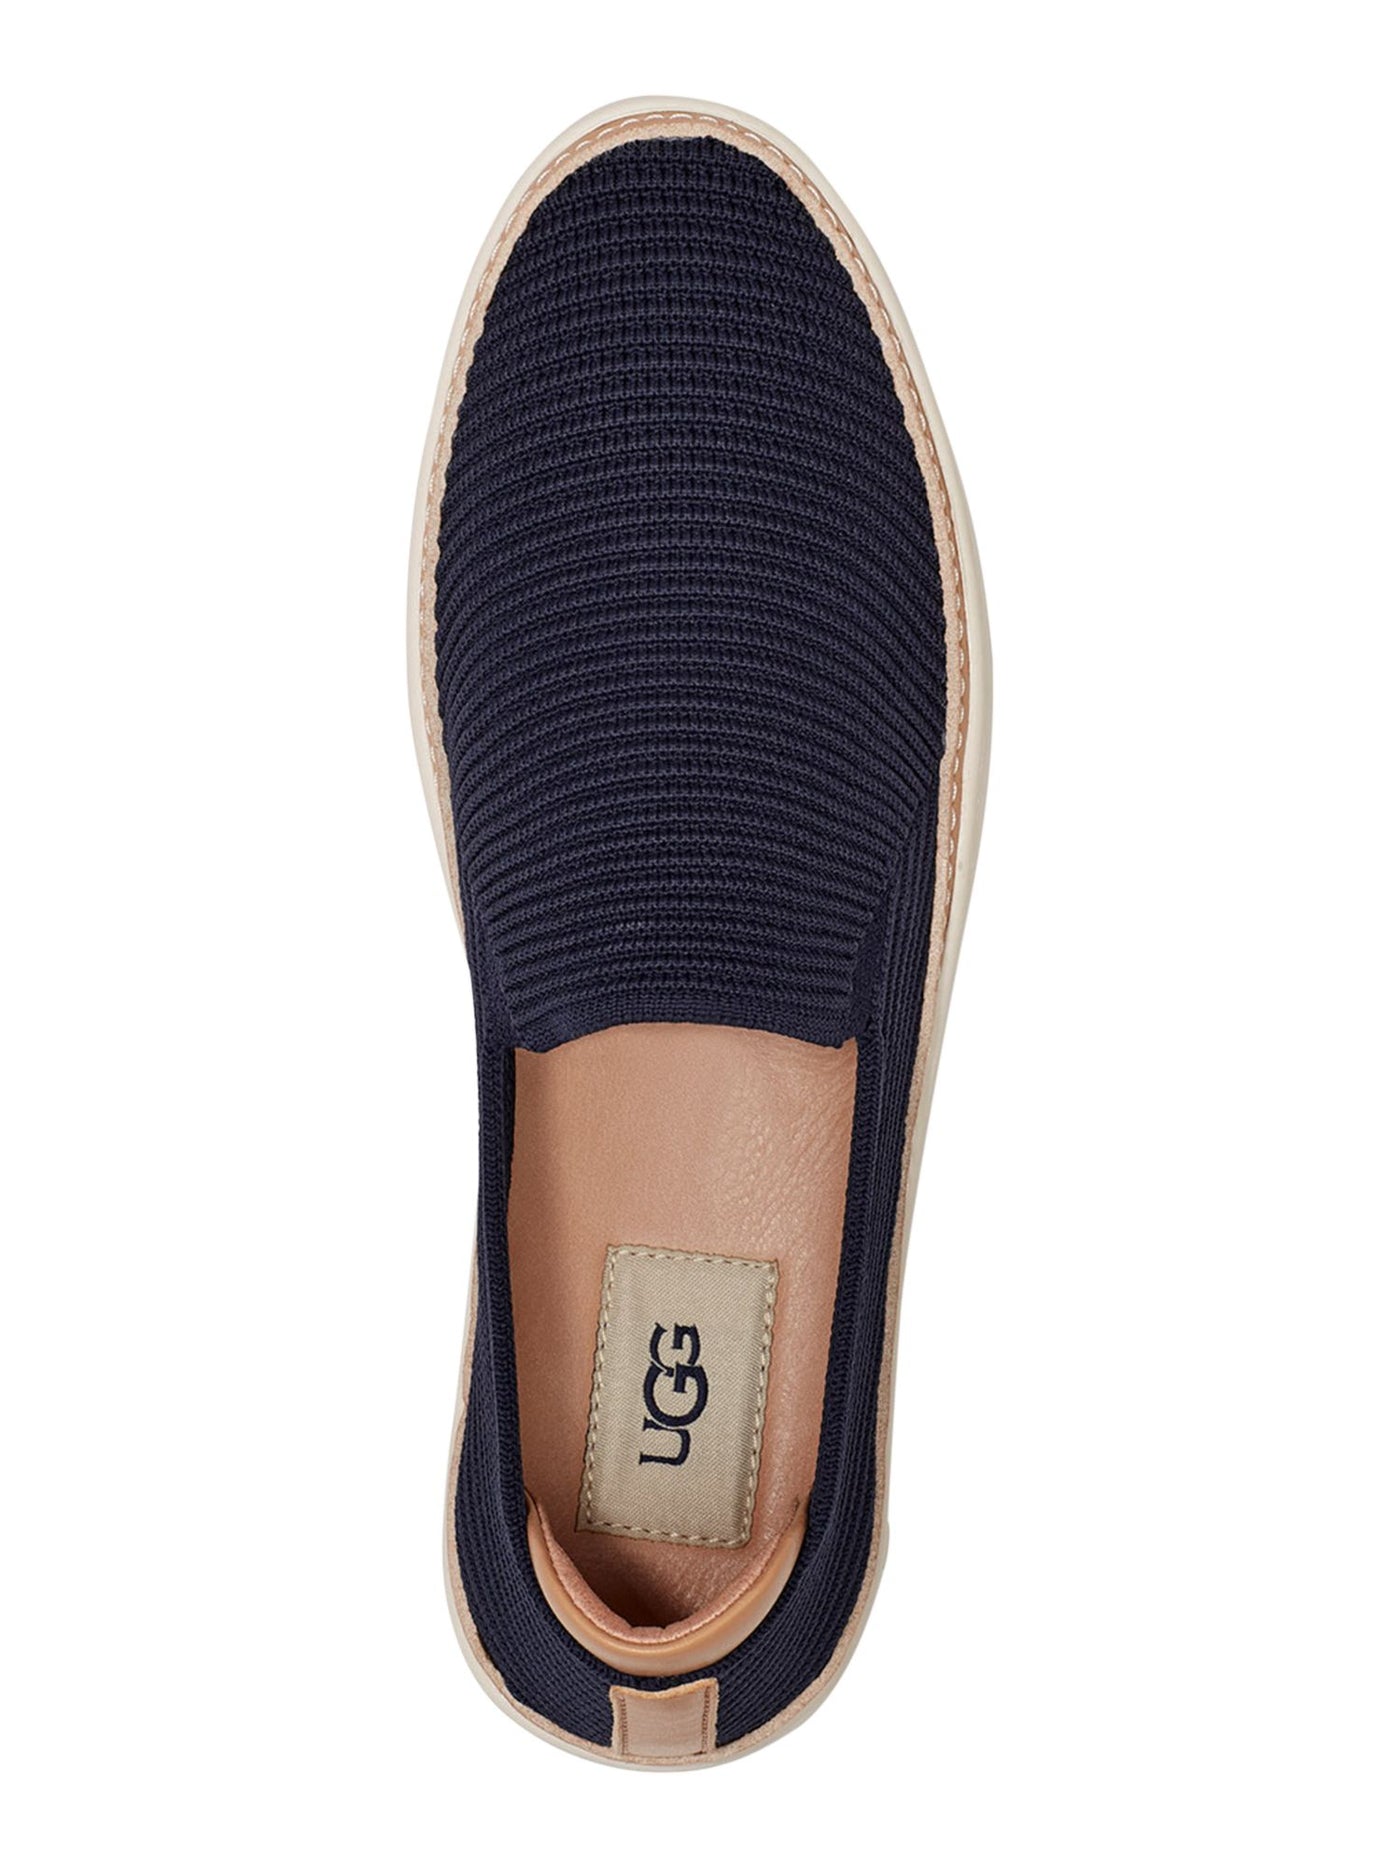 UGG Womens Navy Knit Goring Padded Sammy Round Toe Slip On Sneakers Shoes 7